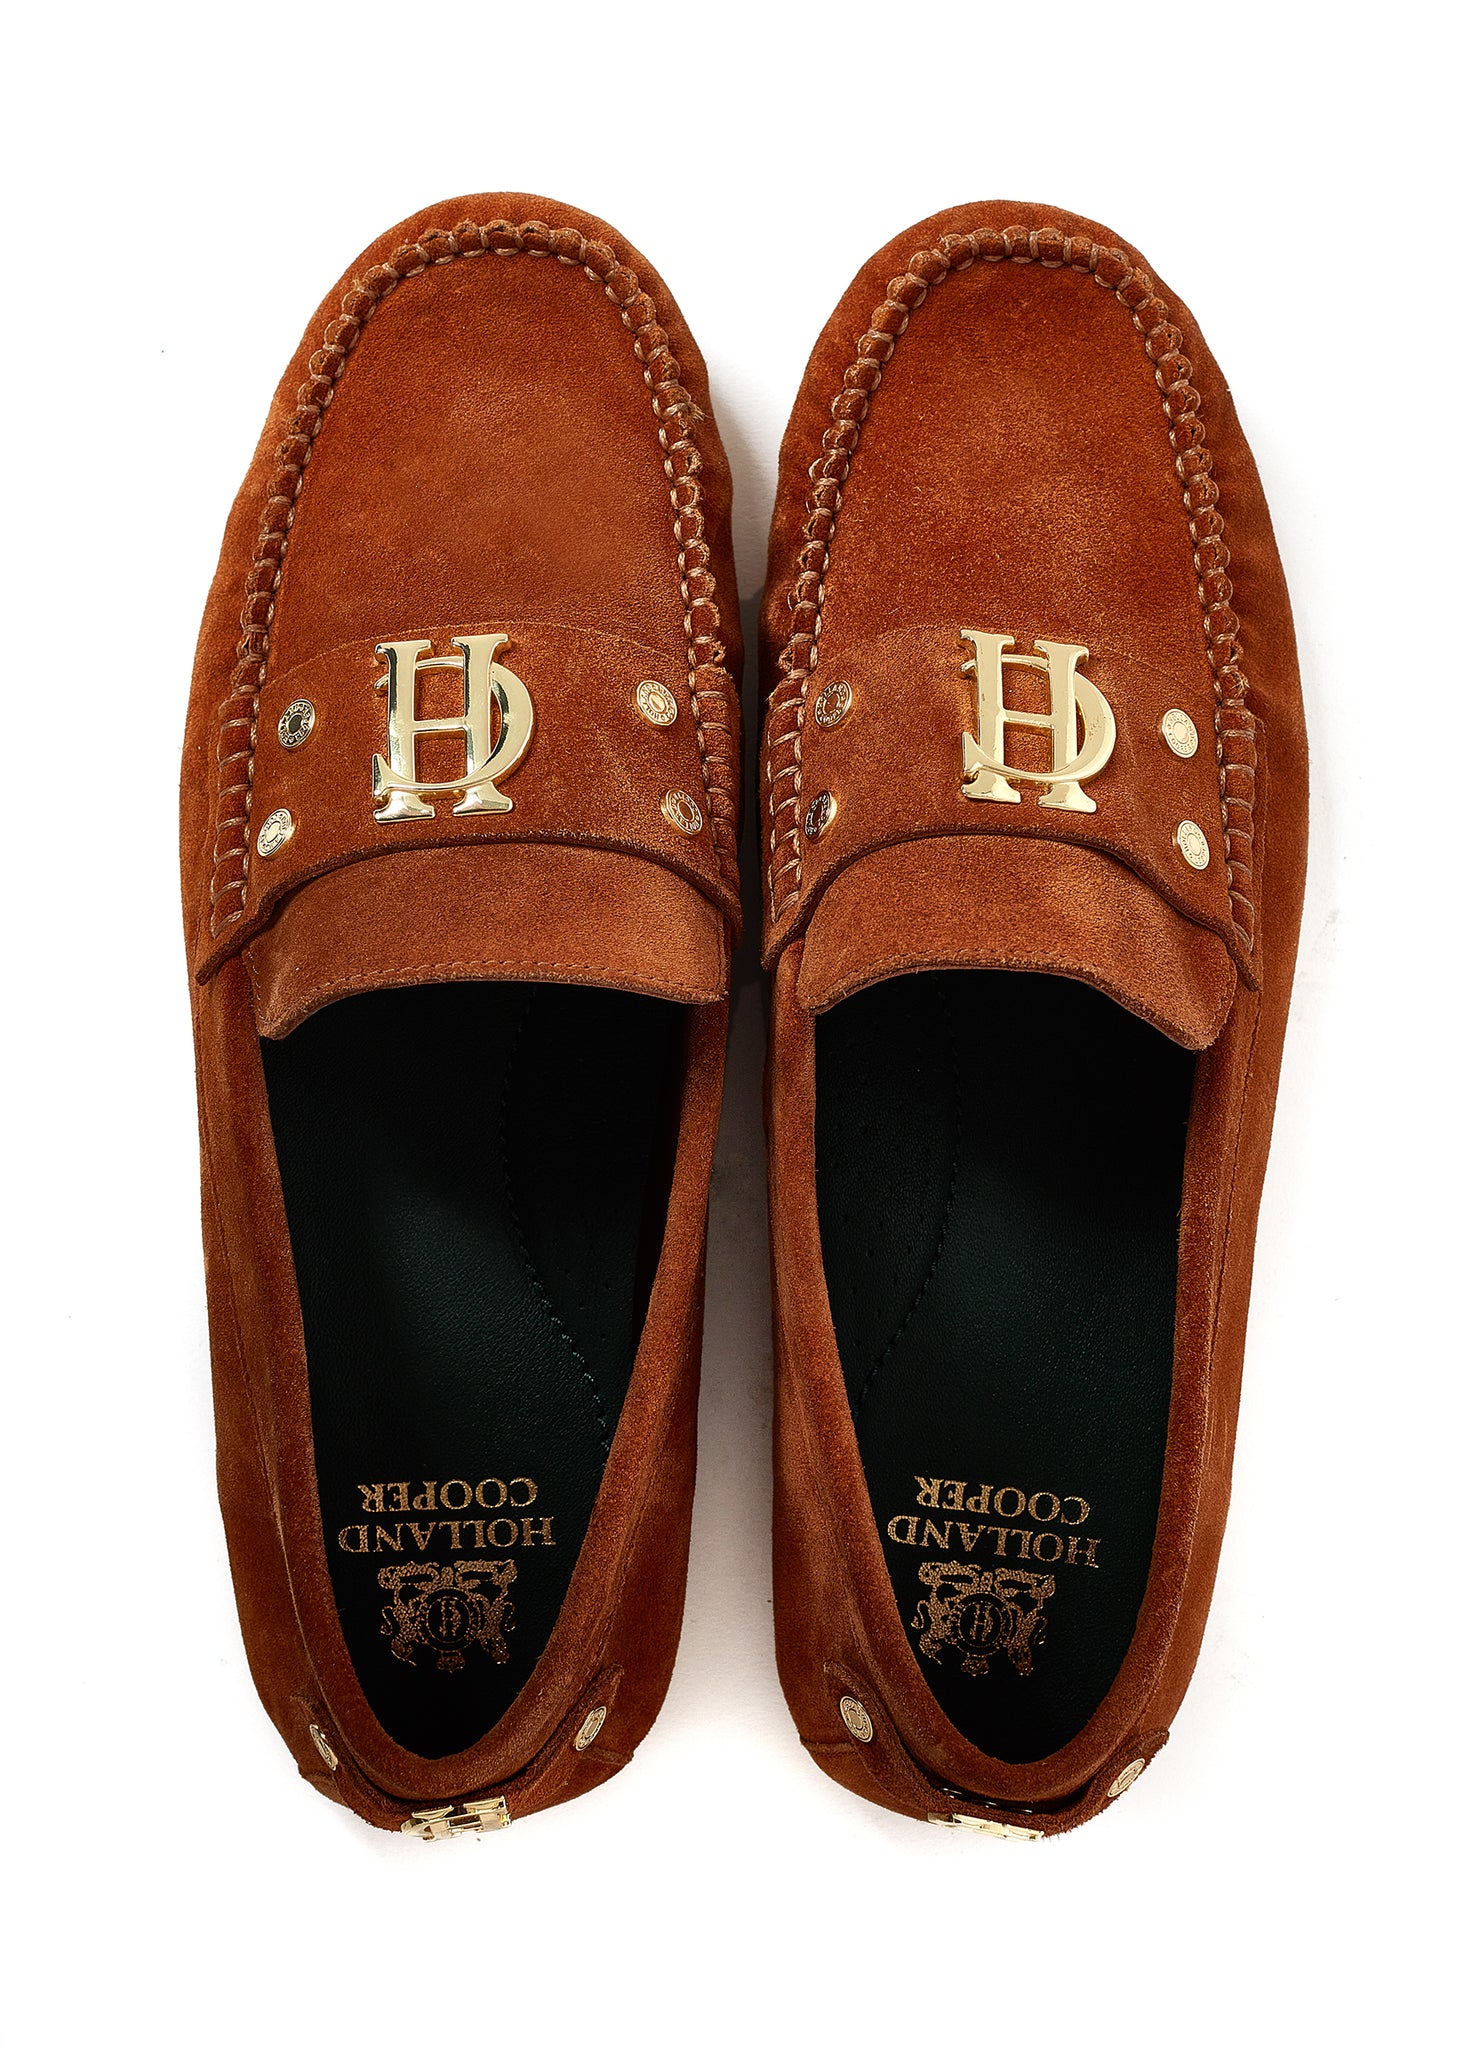 birds eye view of classic tan suede loafers with a leather sole and top stitching details and gold hardware with a dark green inner sole